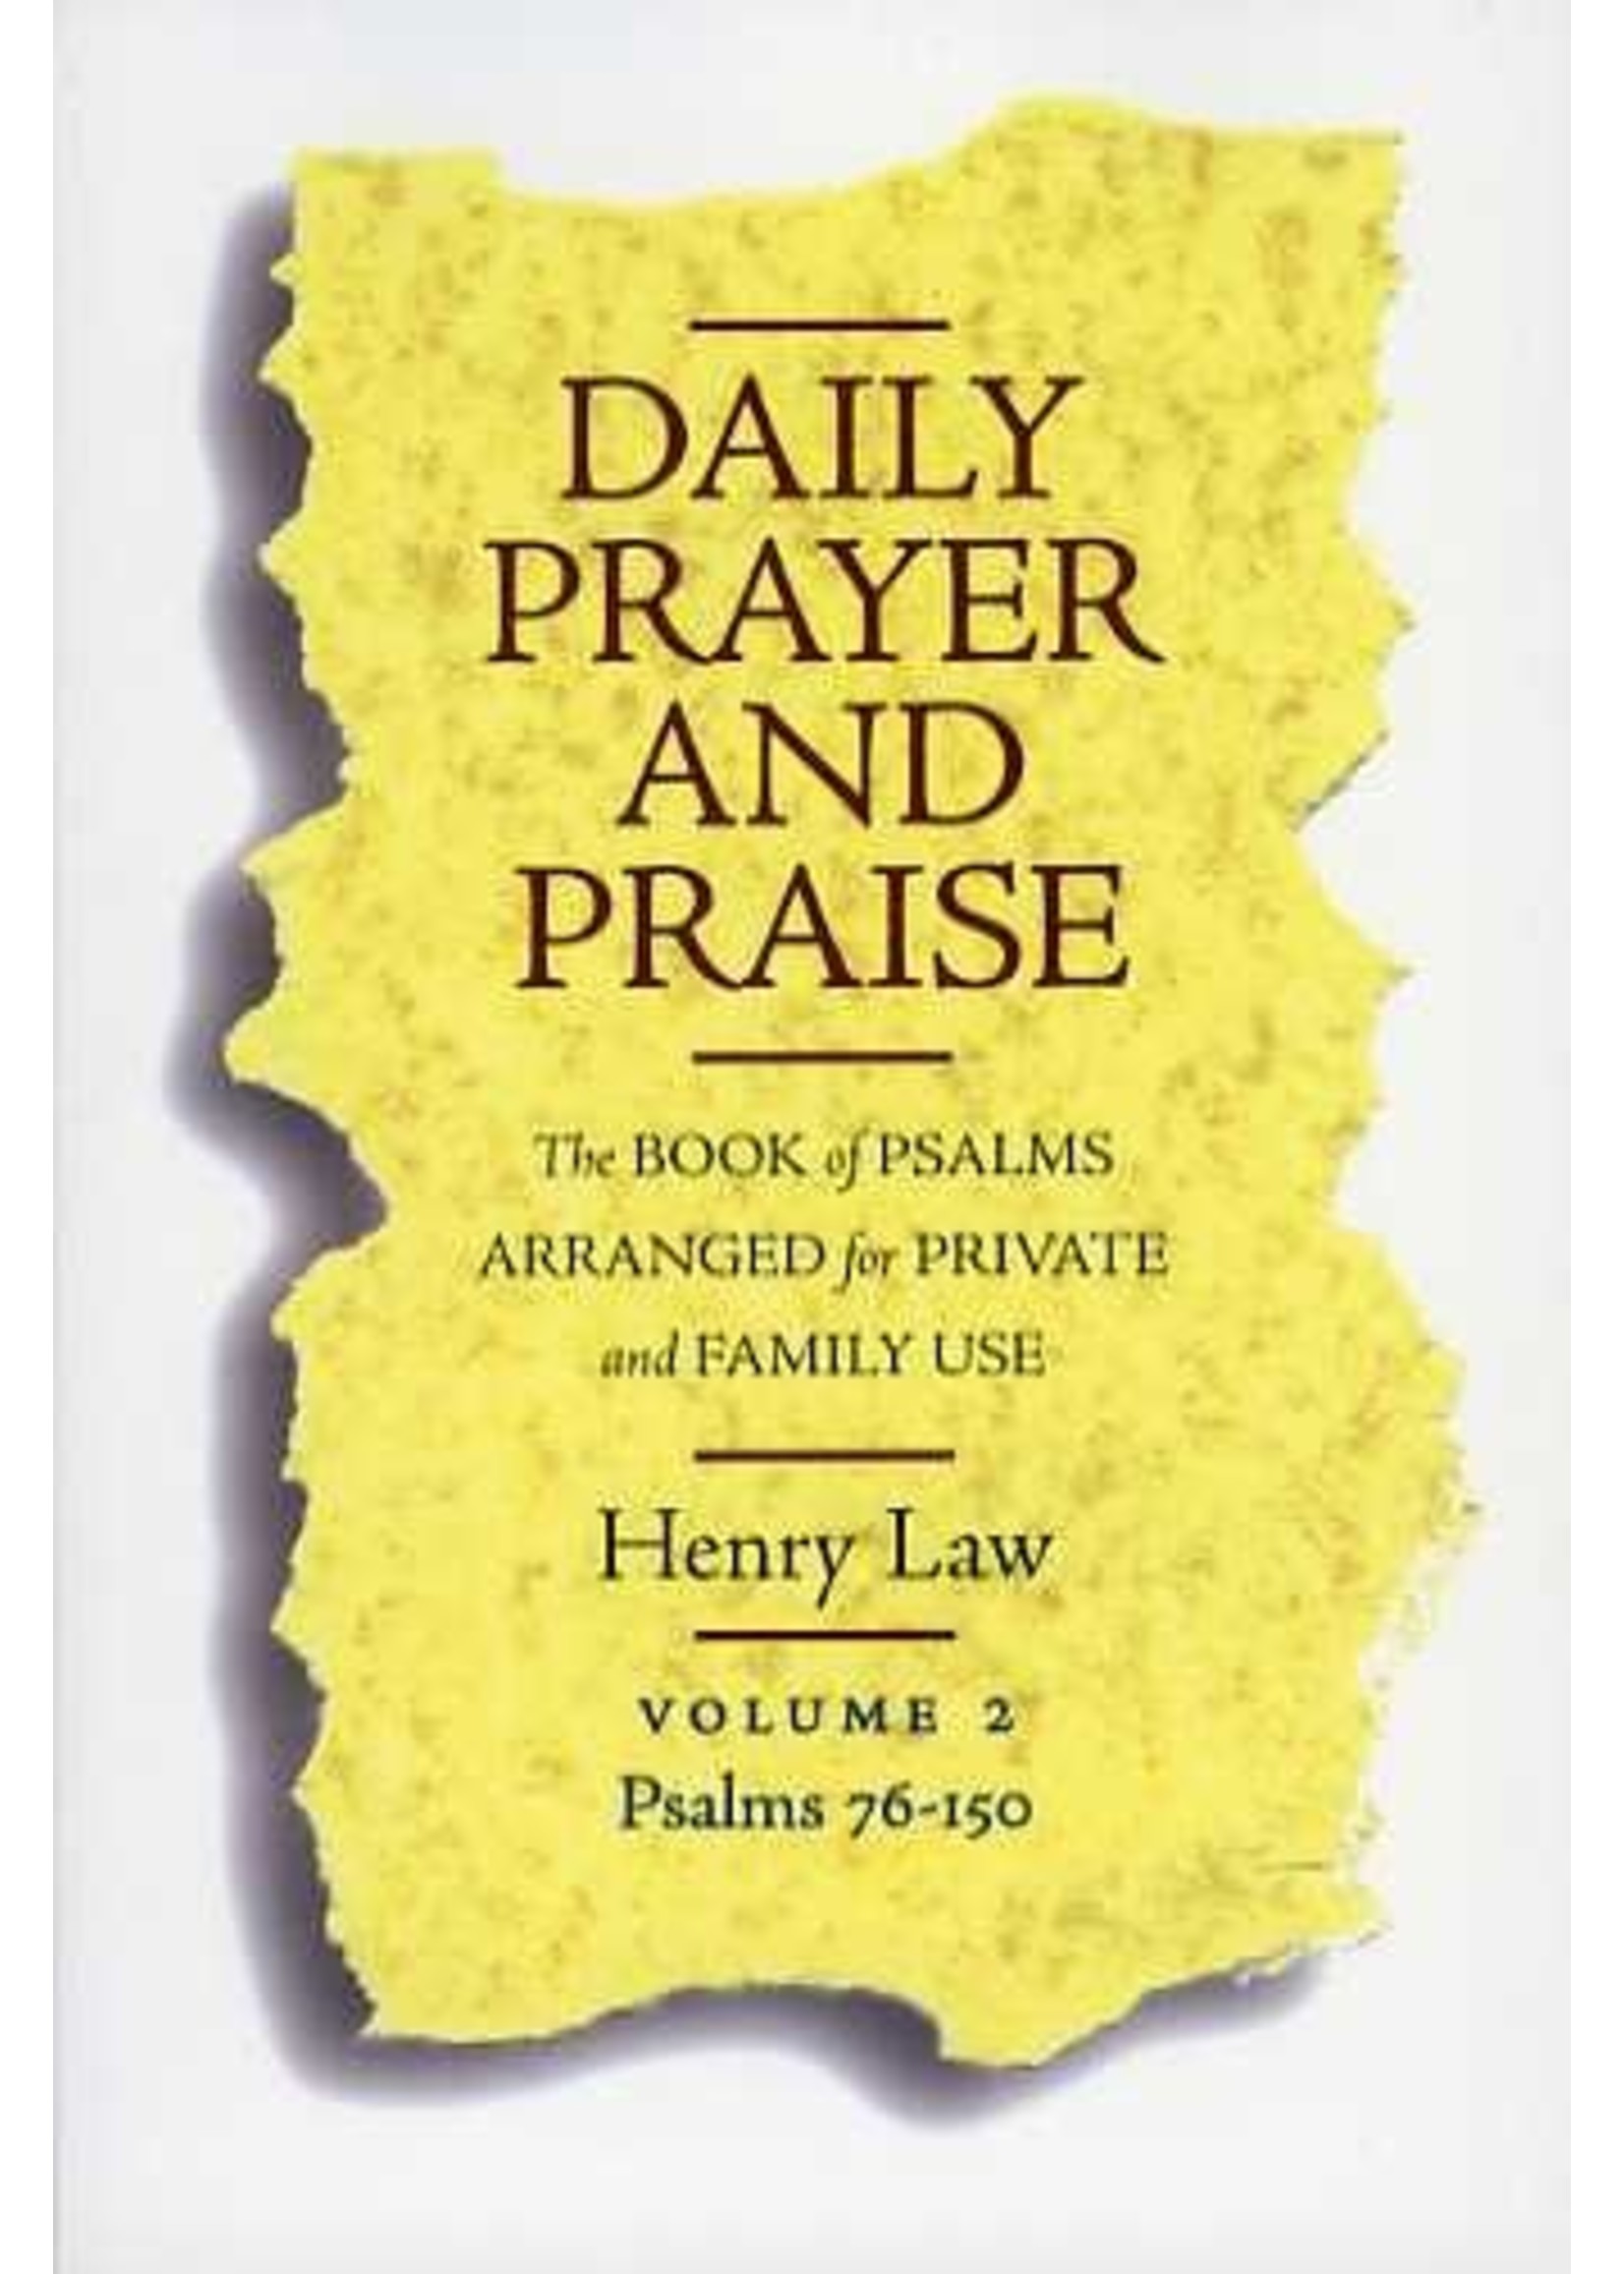 Banner of Truth Daily Praise and Prayer Vol. 2 - Henry Law